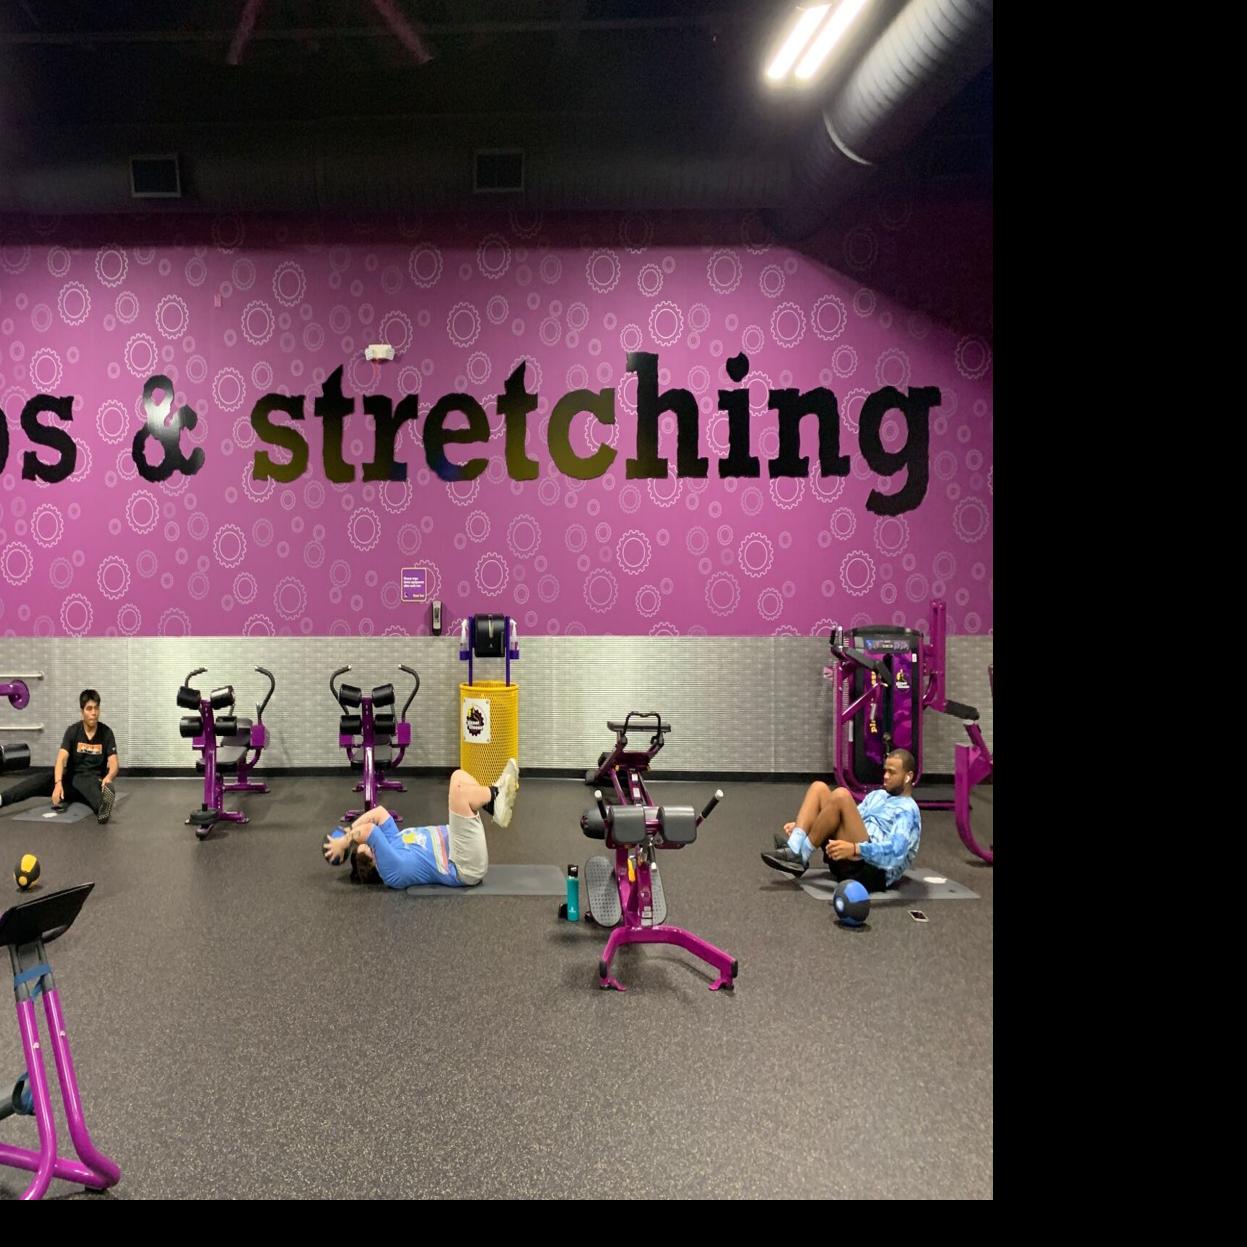 Planet Fitness opens gyms to all to help beat the haze